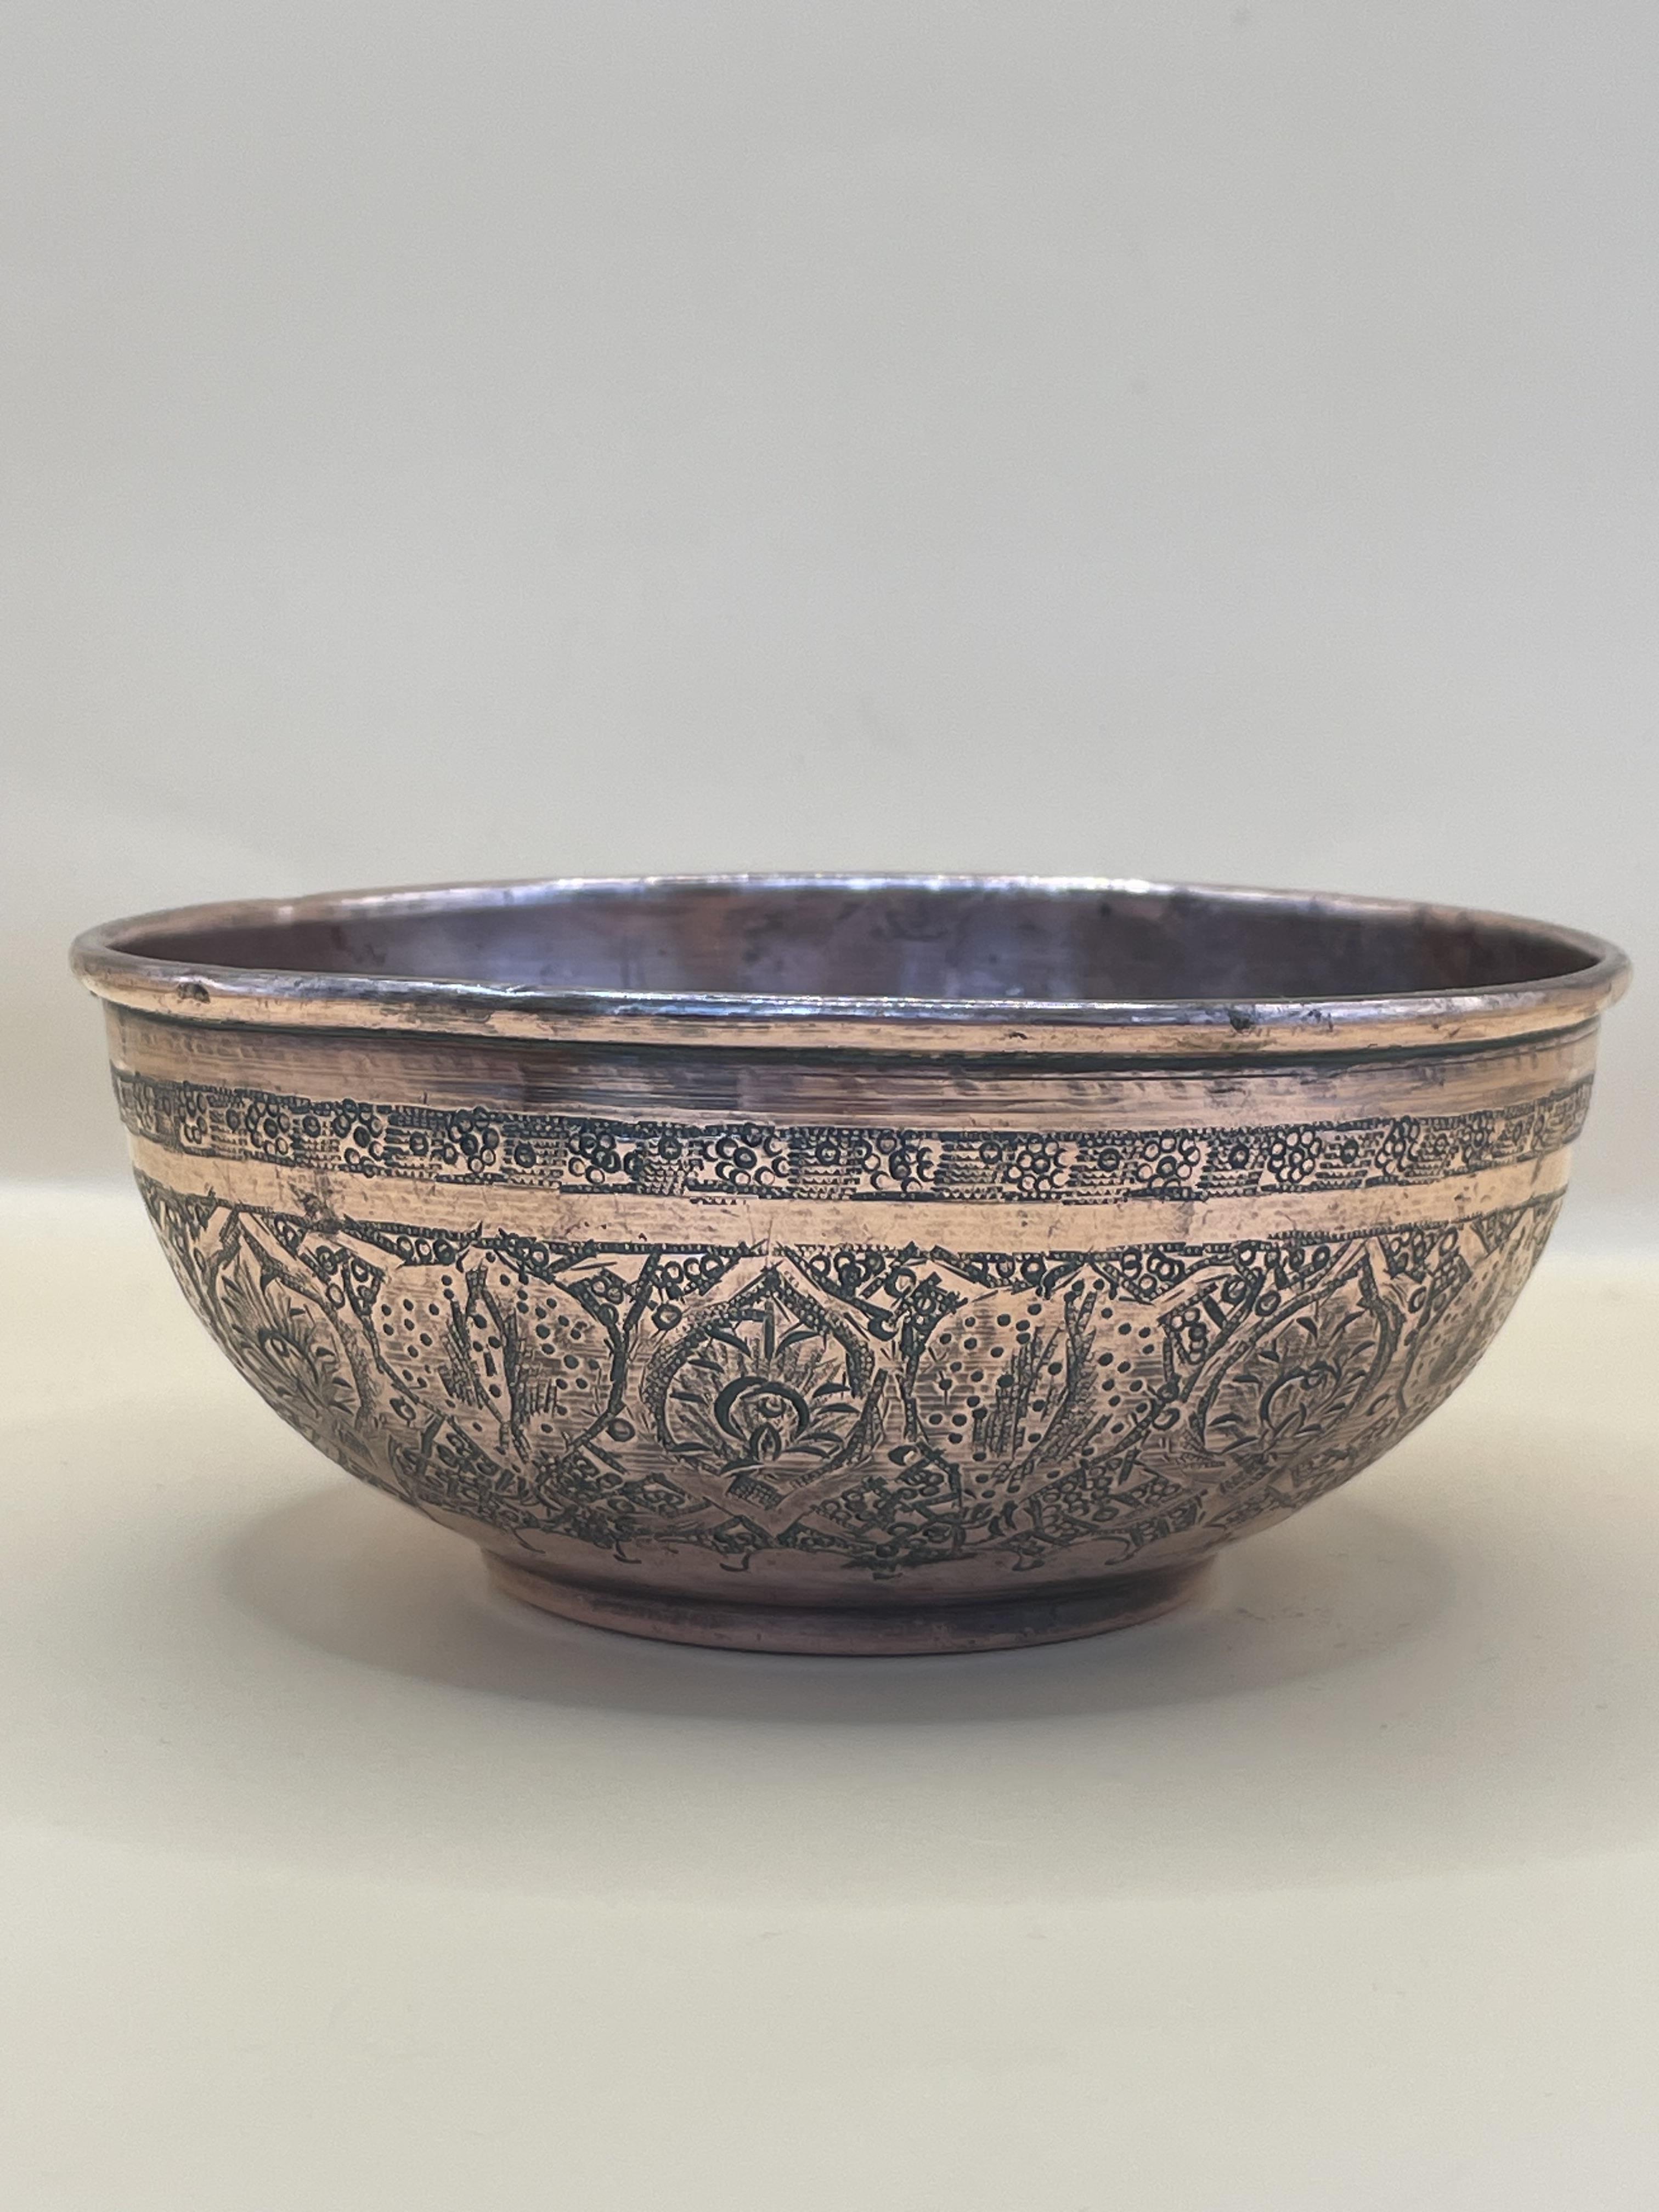  Century Indian Copper Bowl, having embossed decoration all over and standing on a shallow foot base